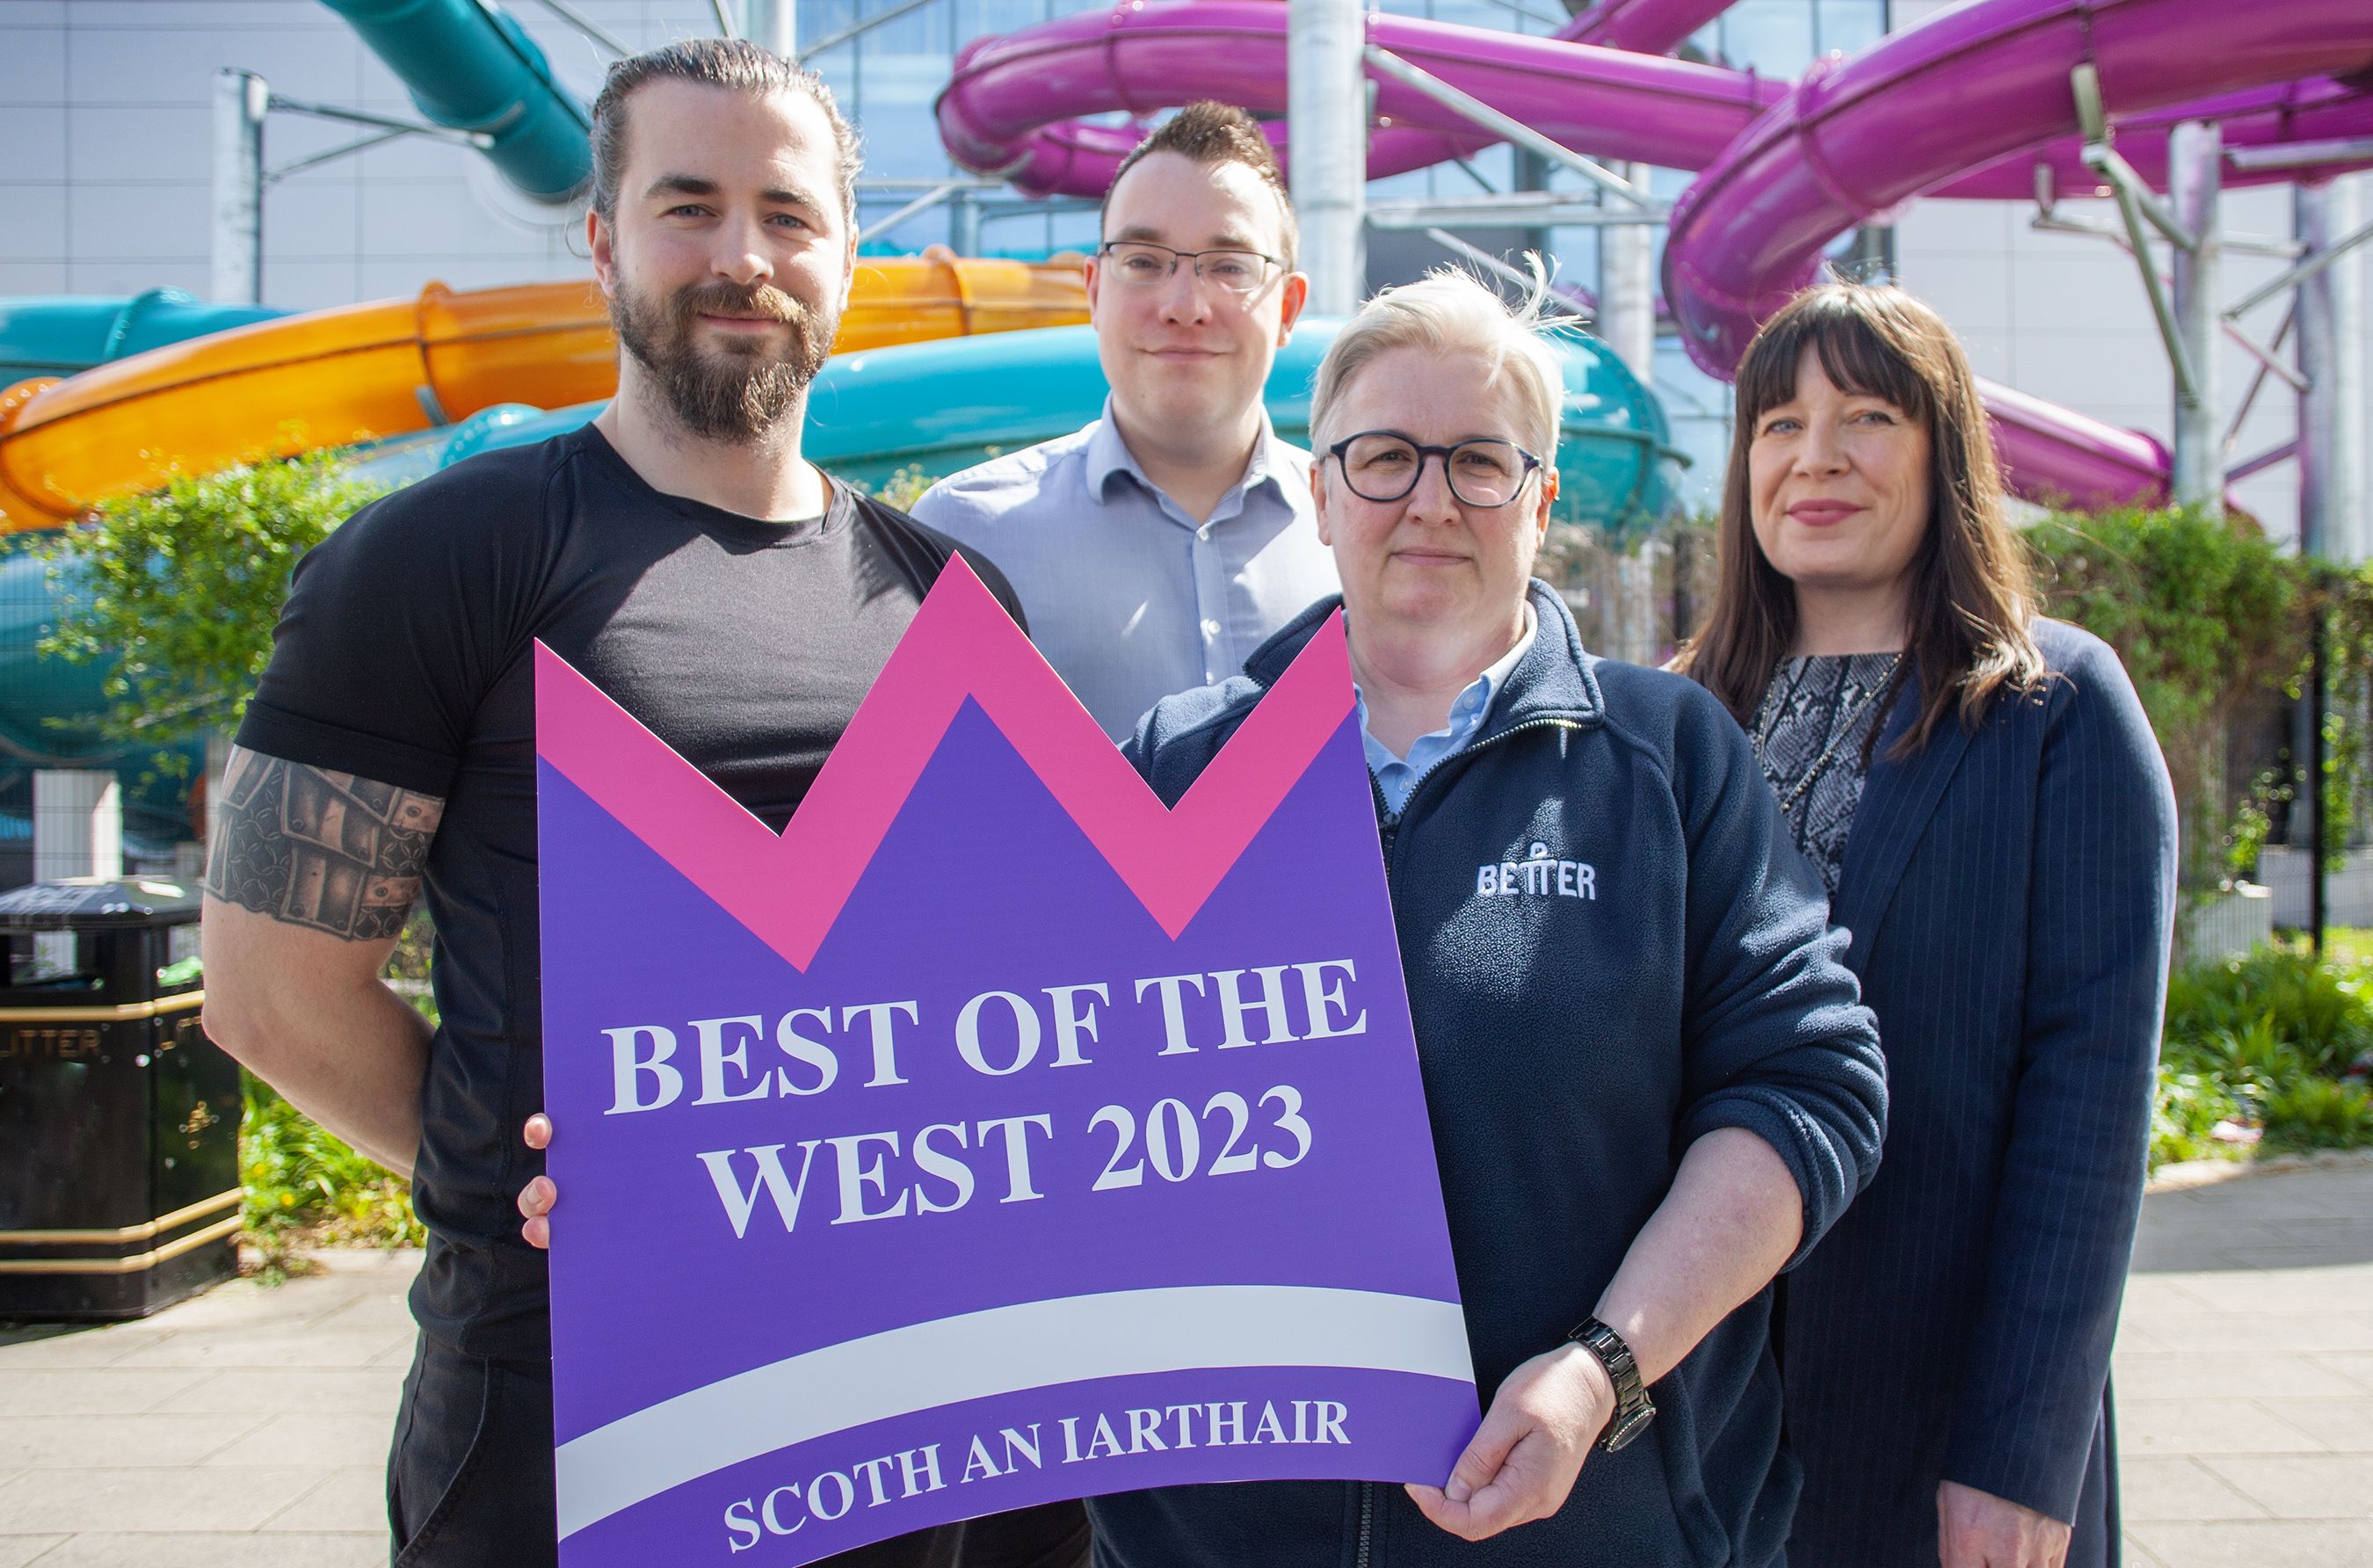 GLL MAKES IT BETTER: Better staff member James Fryers, Conor McParland, Andersonstown News, with Julie Bolton, General Manager Andersonstown Leisure Centre, and Sarah Owens, Better Regional Marketing Manager